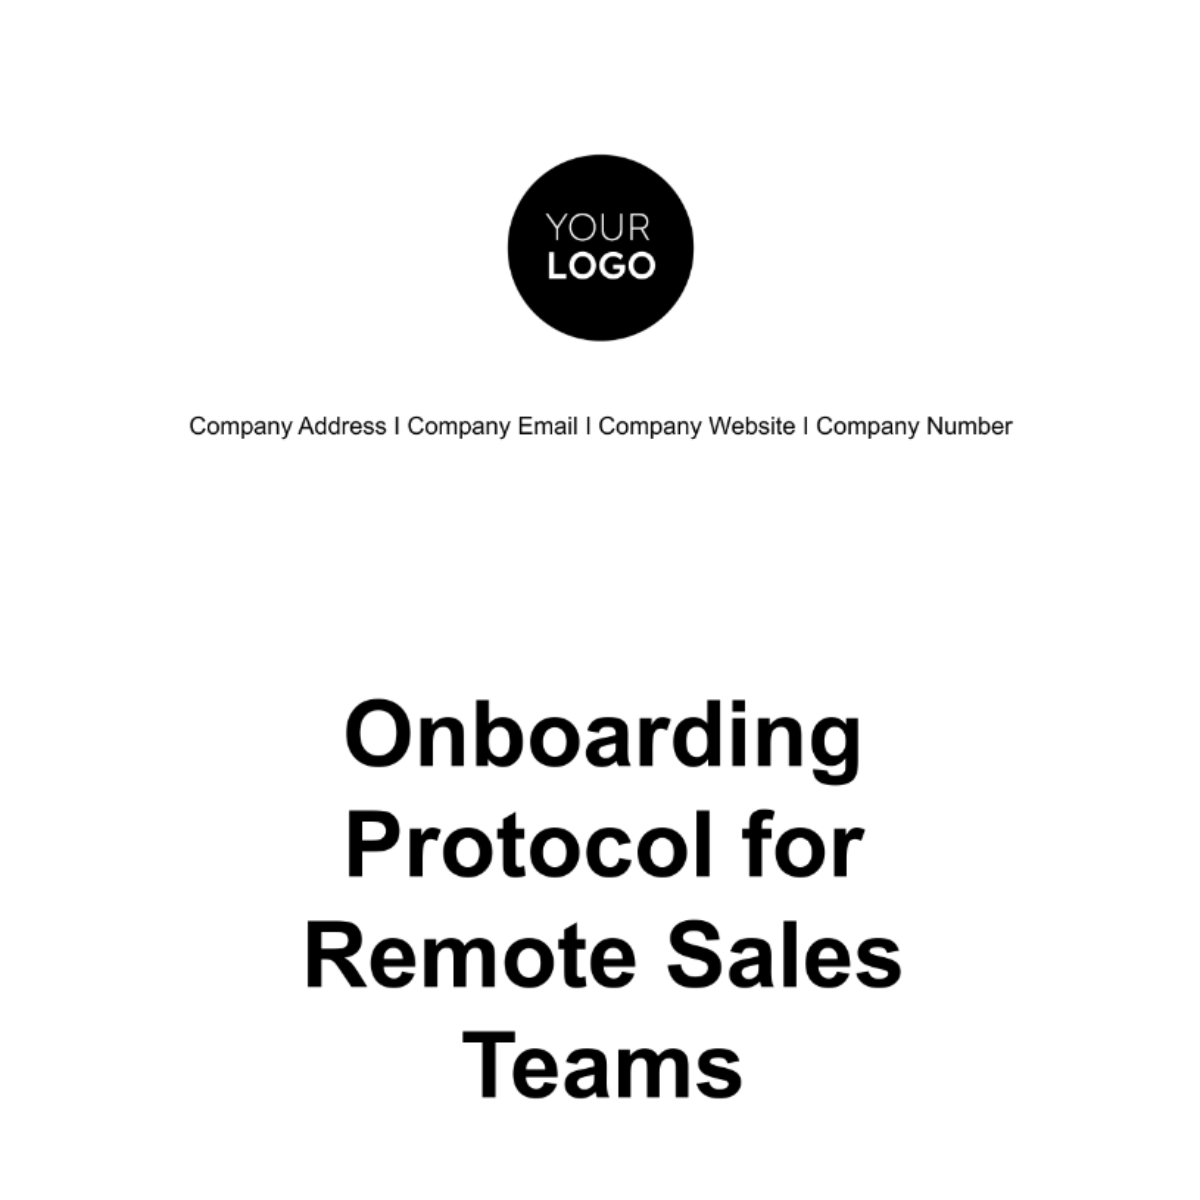 Free Onboarding Protocol for Remote Sales Teams Template